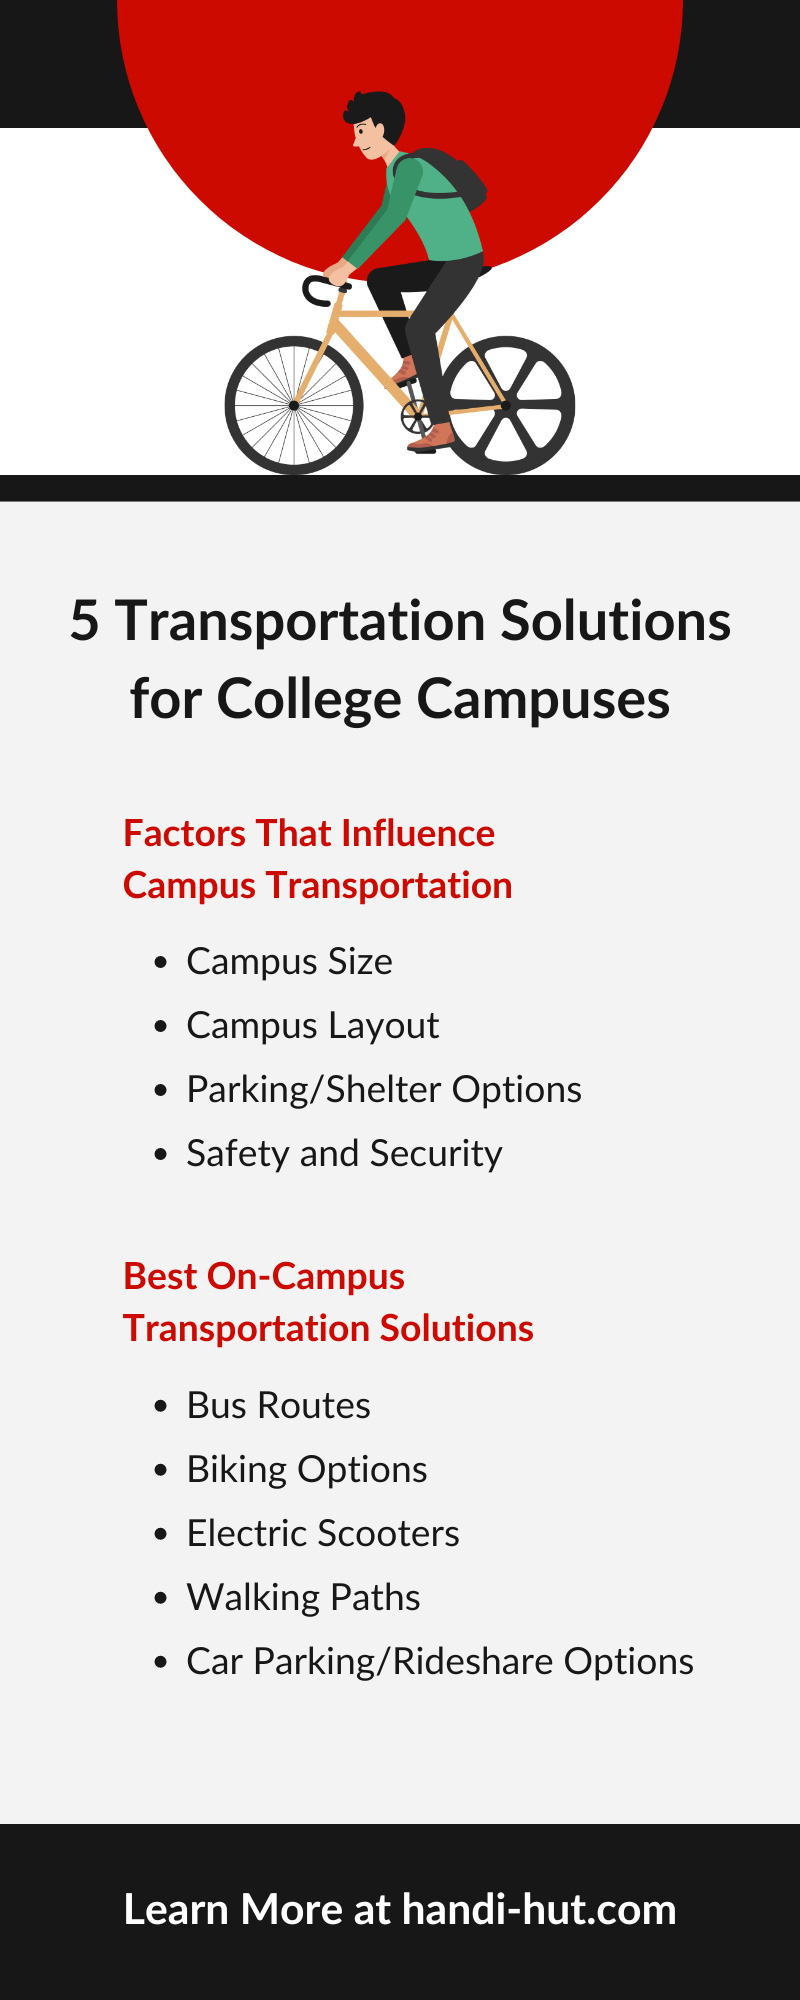 5 Transportation Solutions for College Campuses